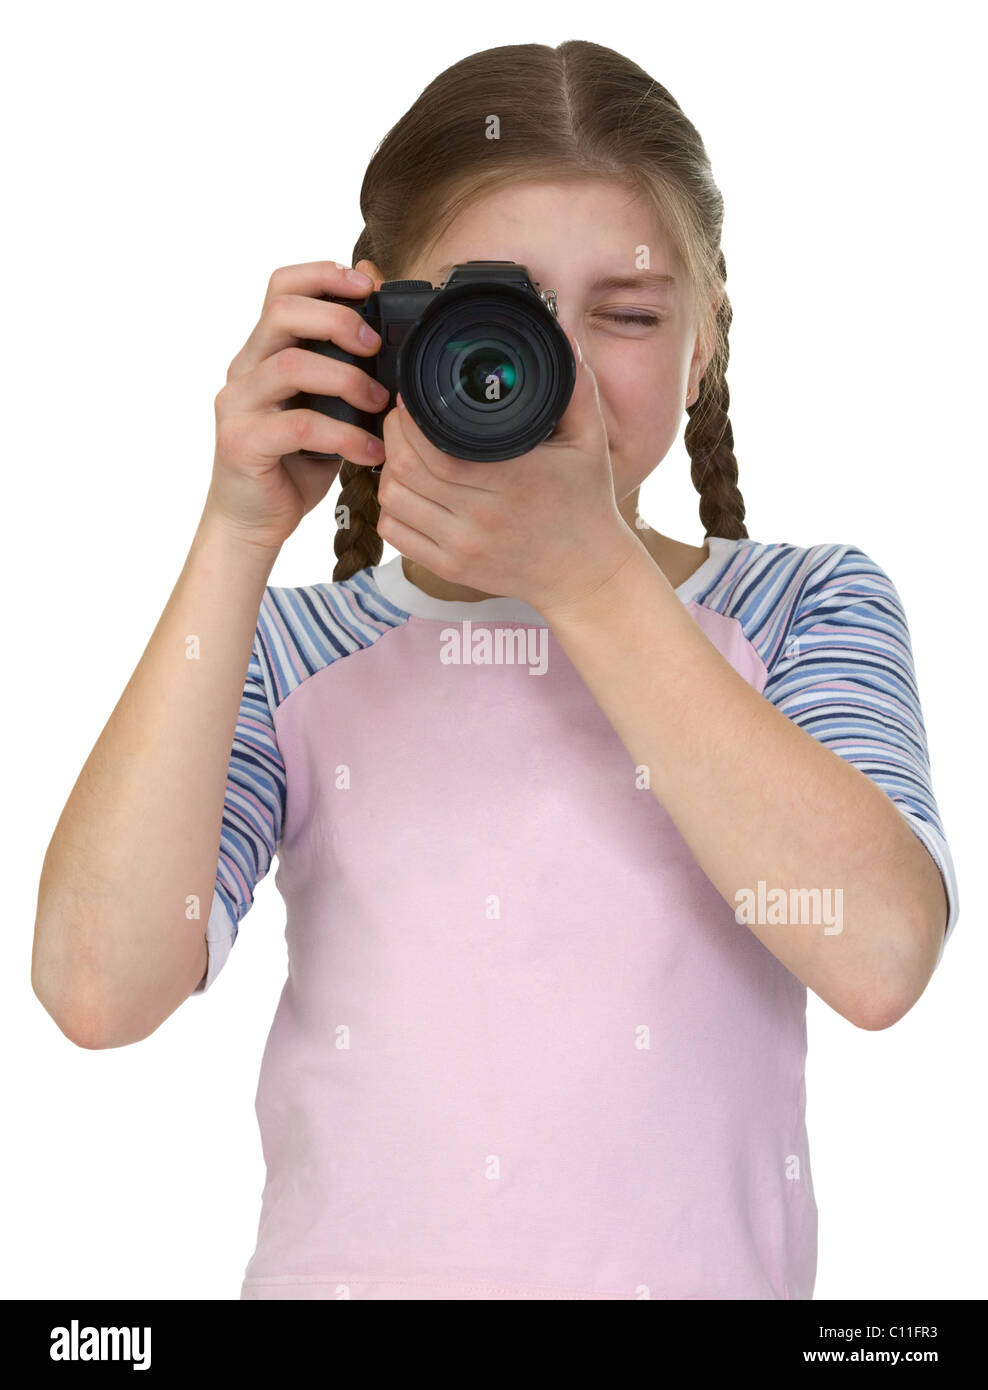 Little girl with camera isolated on white background Stock Photo